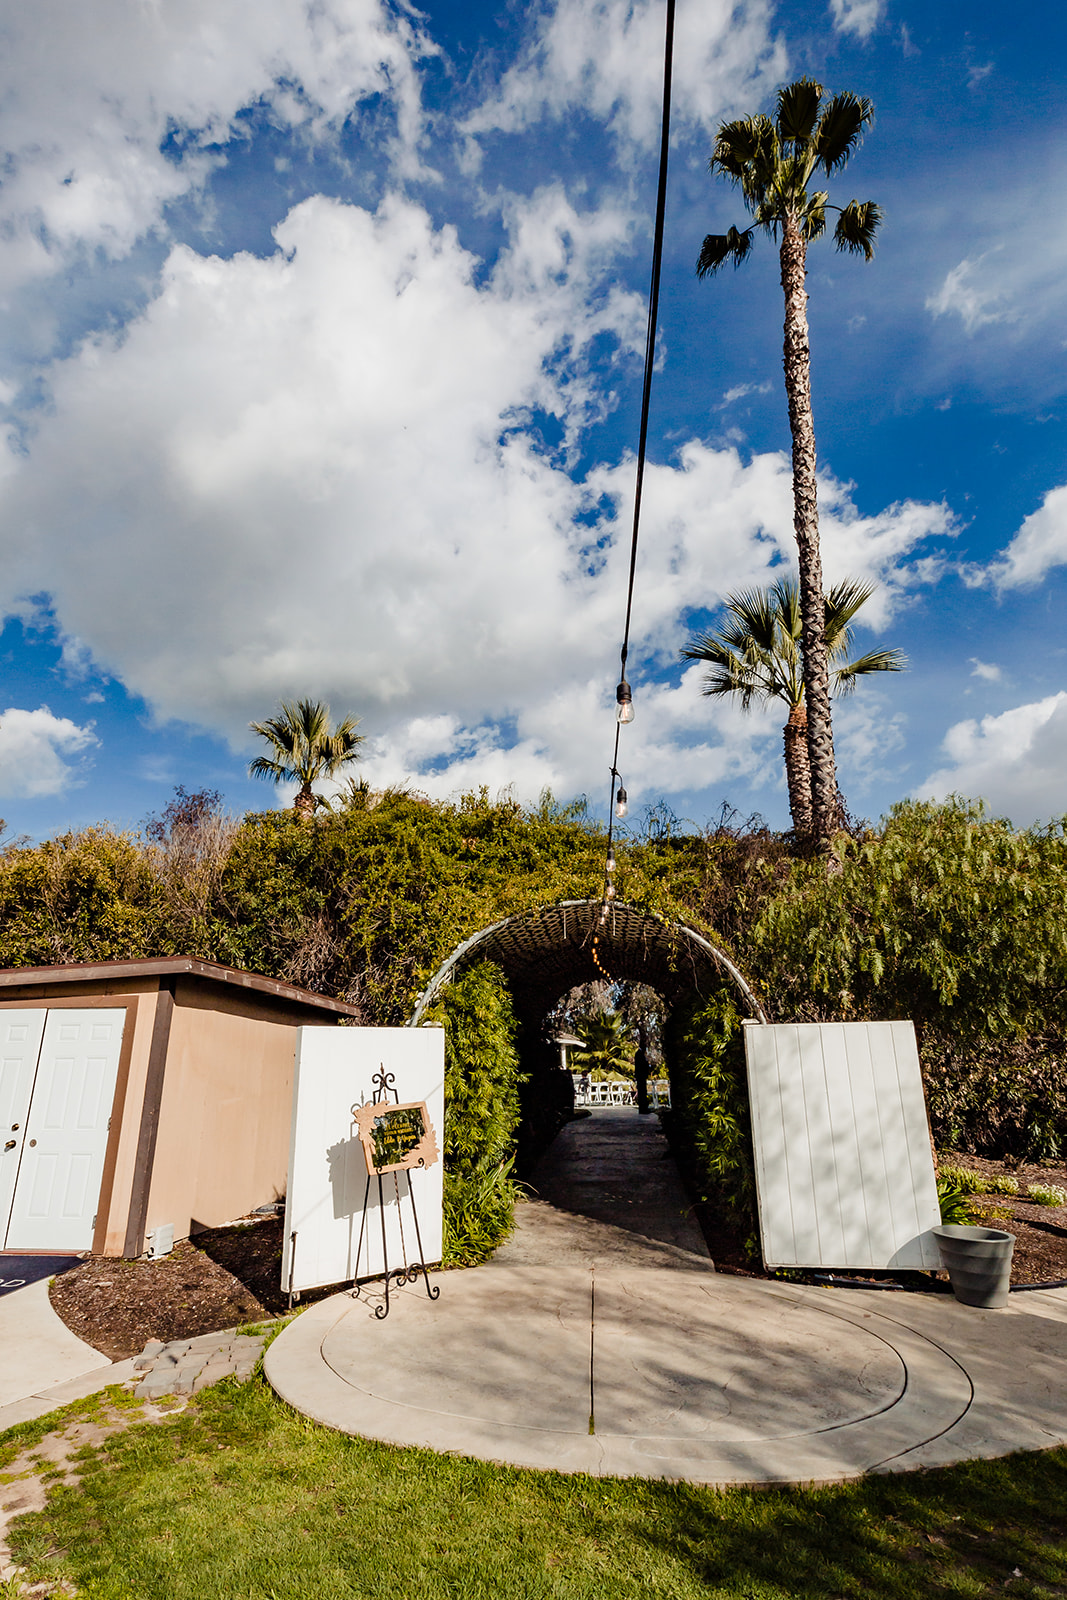 The entrance tunnel at The Orchard by Wedgewood weddings in Menifee, CA